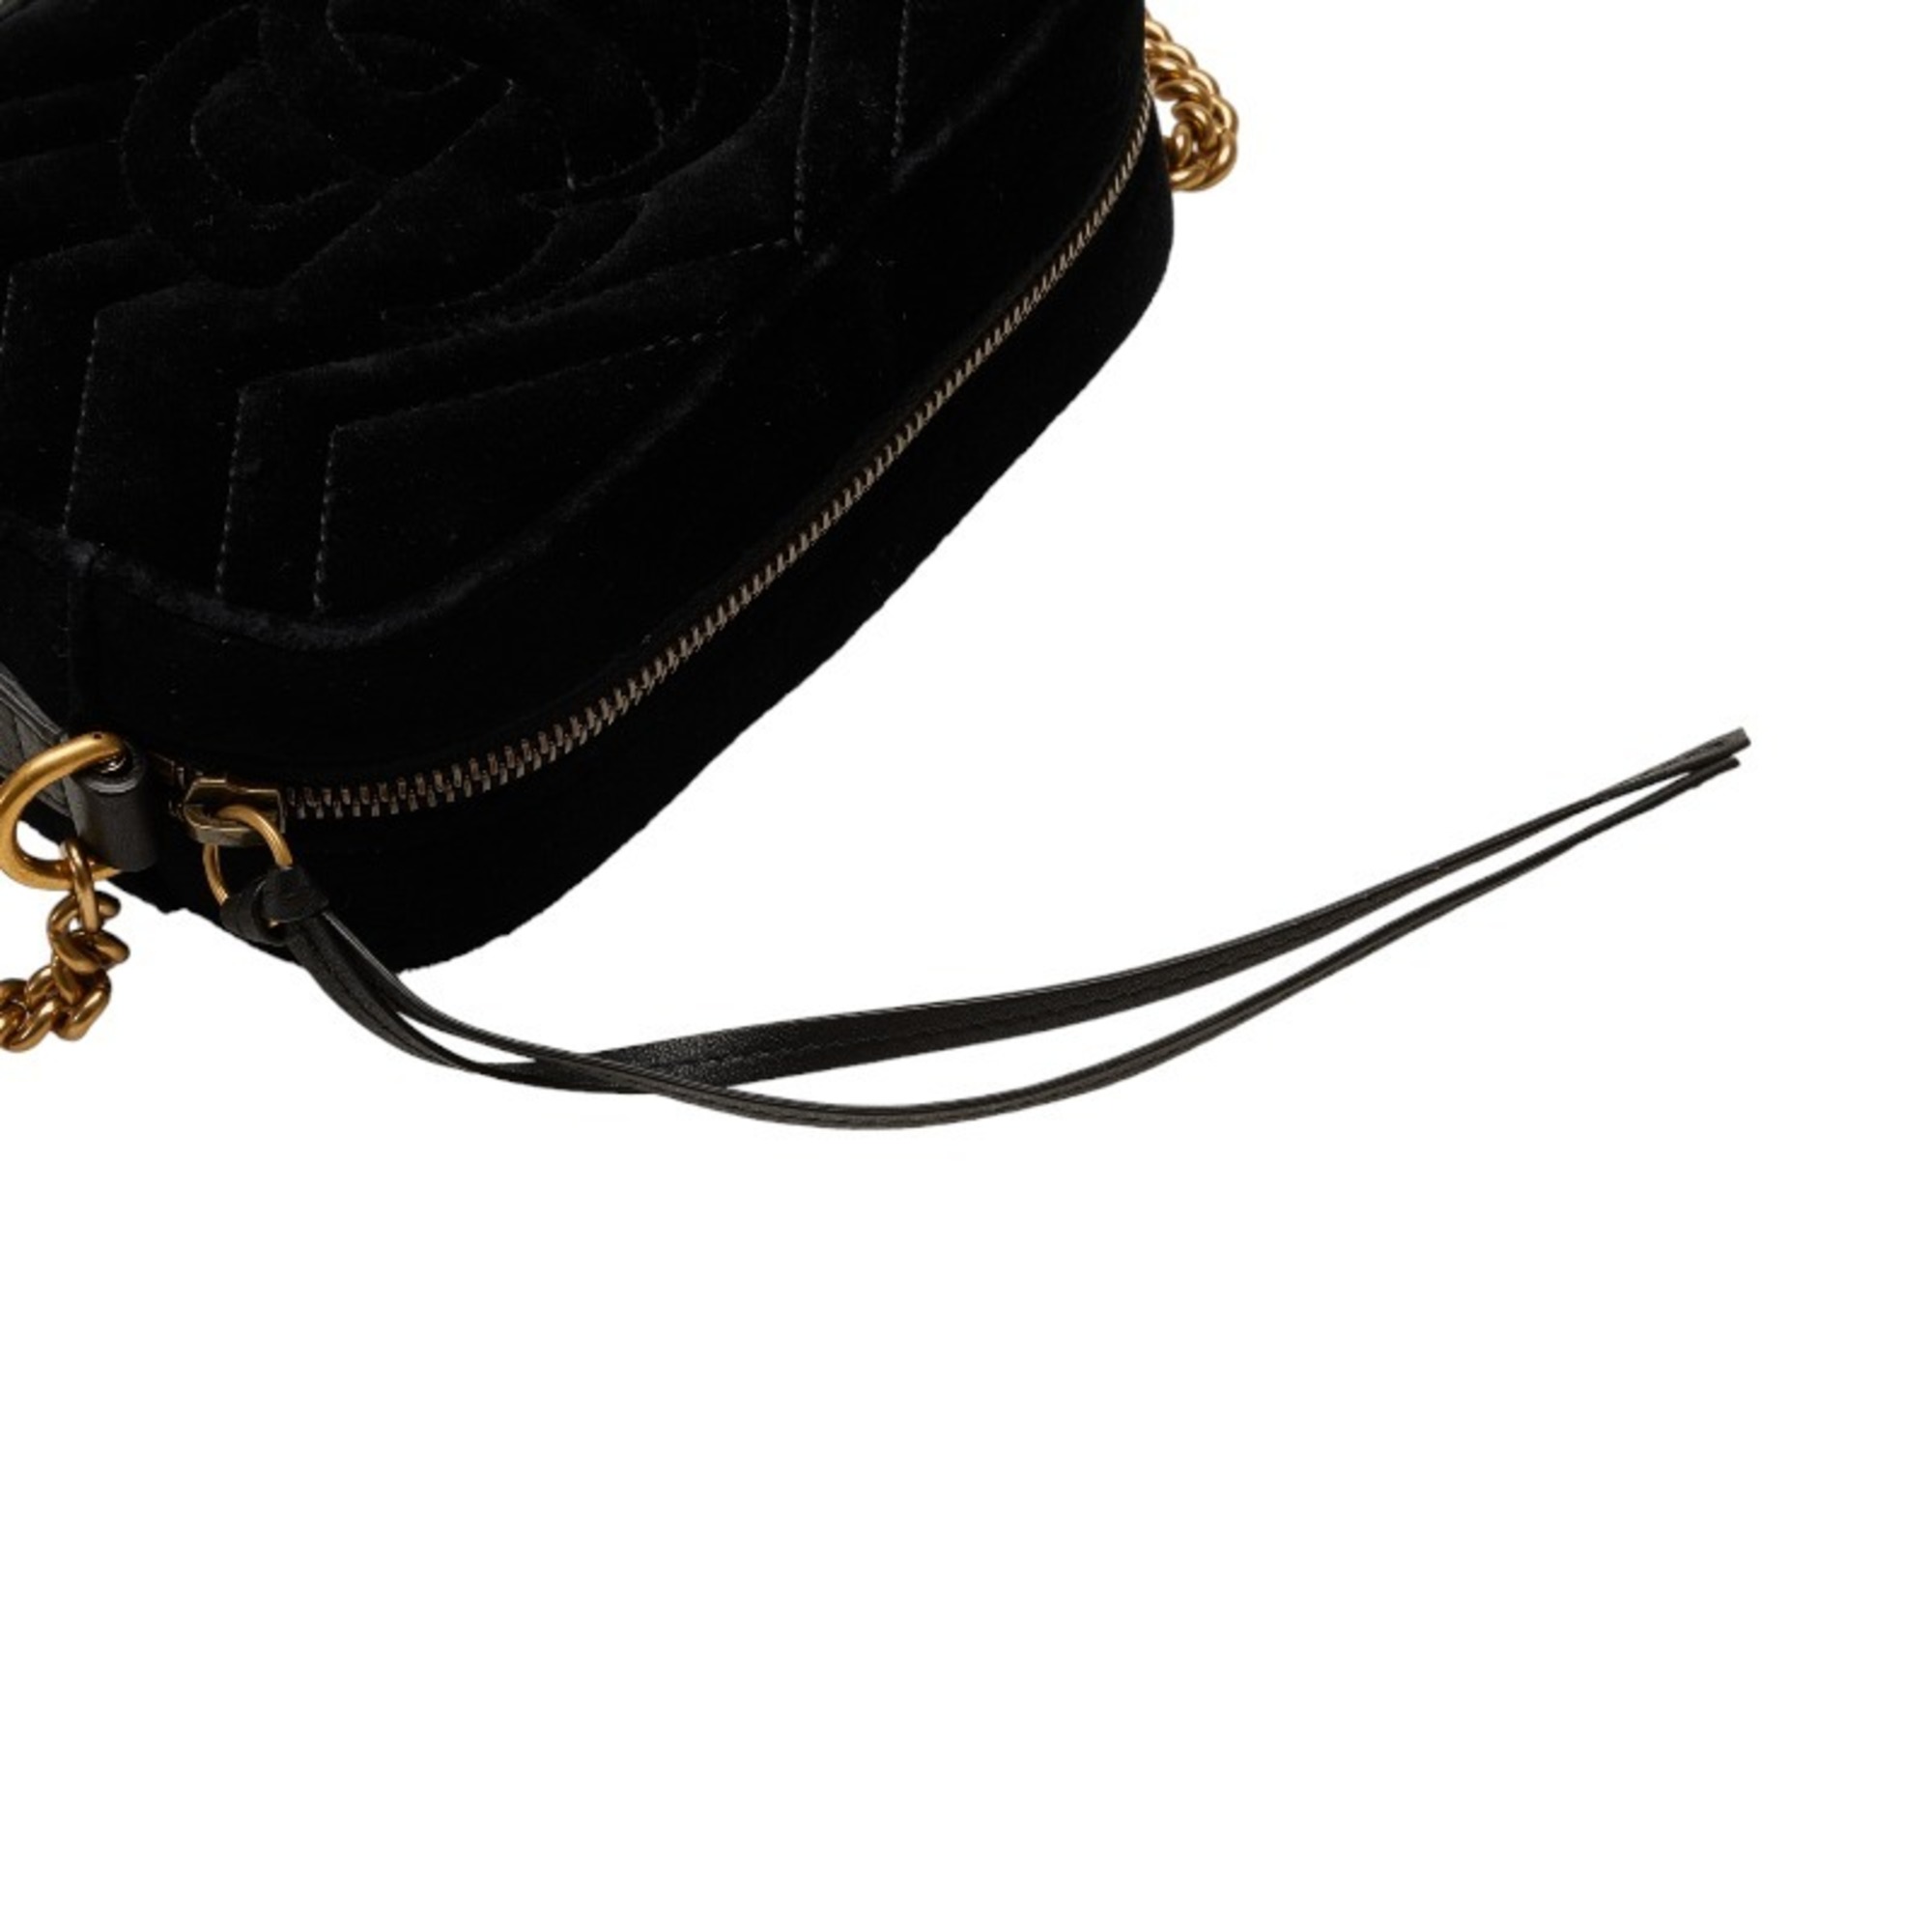 Gucci GG Marmont Quilted Bijou Rhinestone Shoulder Bag 448065 Black Velor Leather Women's GUCCI